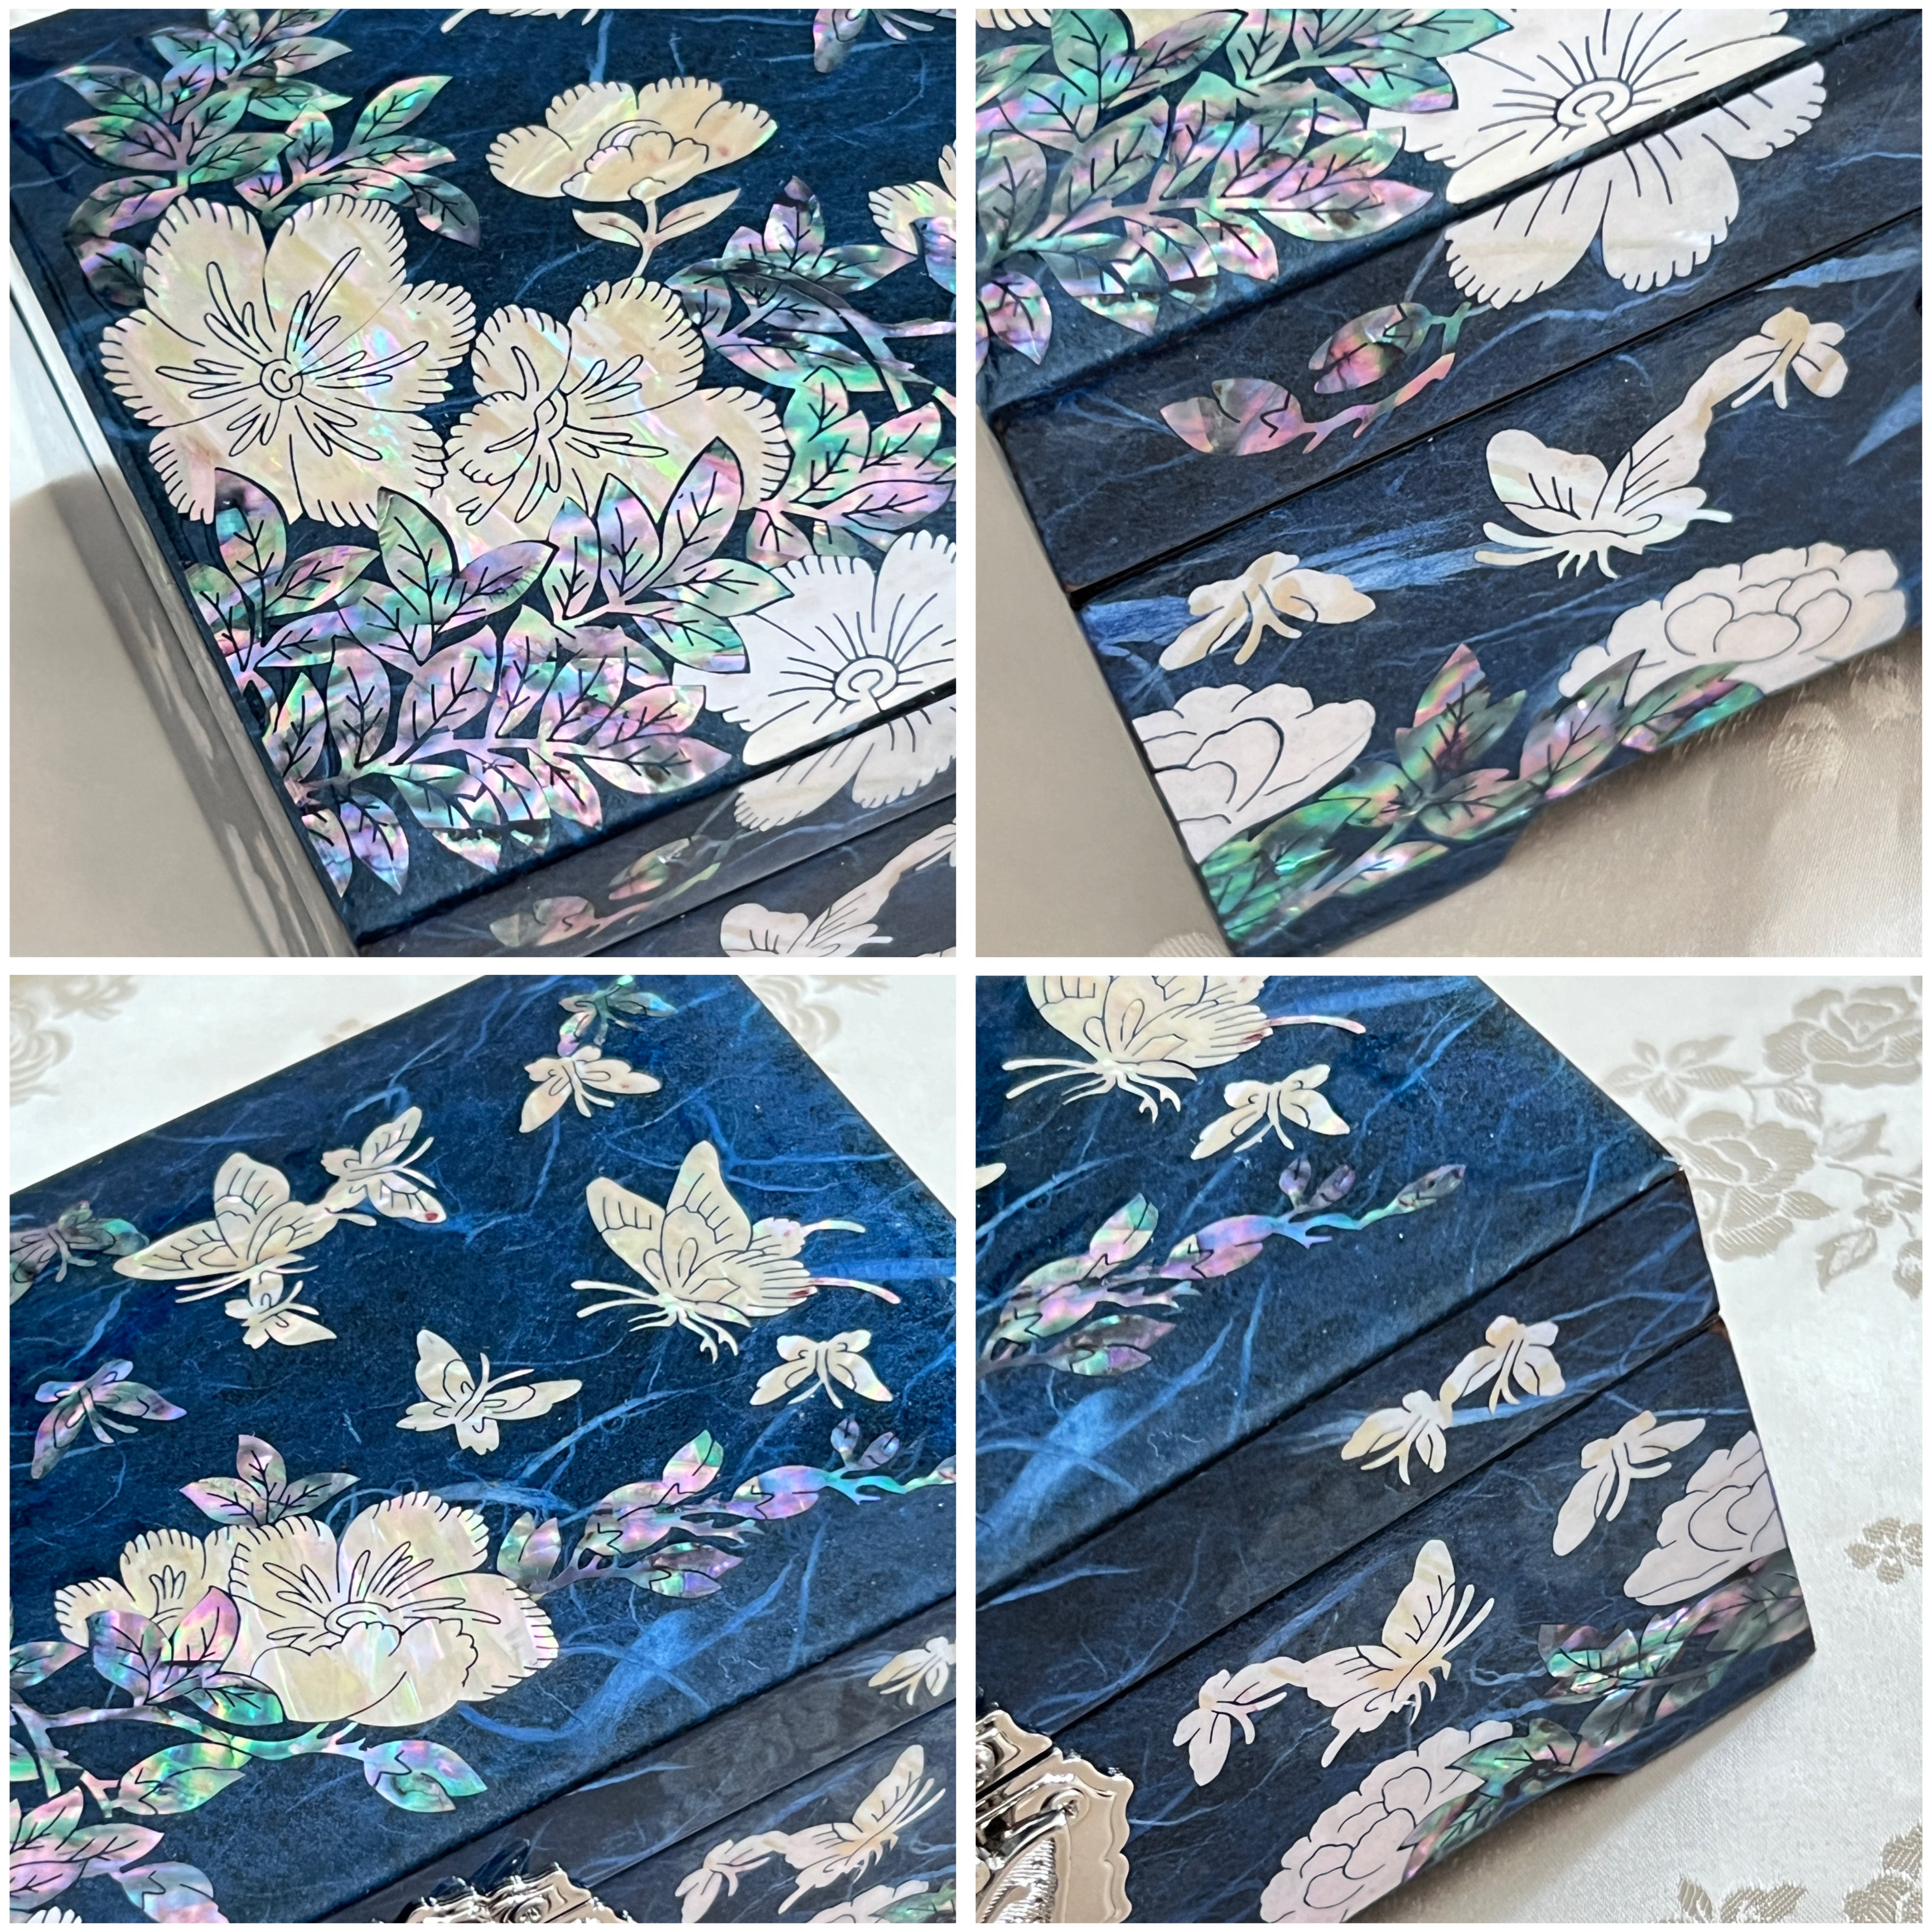 Close up view of Handmade Korean mother of pearl jewelry box with crane and pine pattern on navy paper-layered design, perfect for storing valuable jewelry.